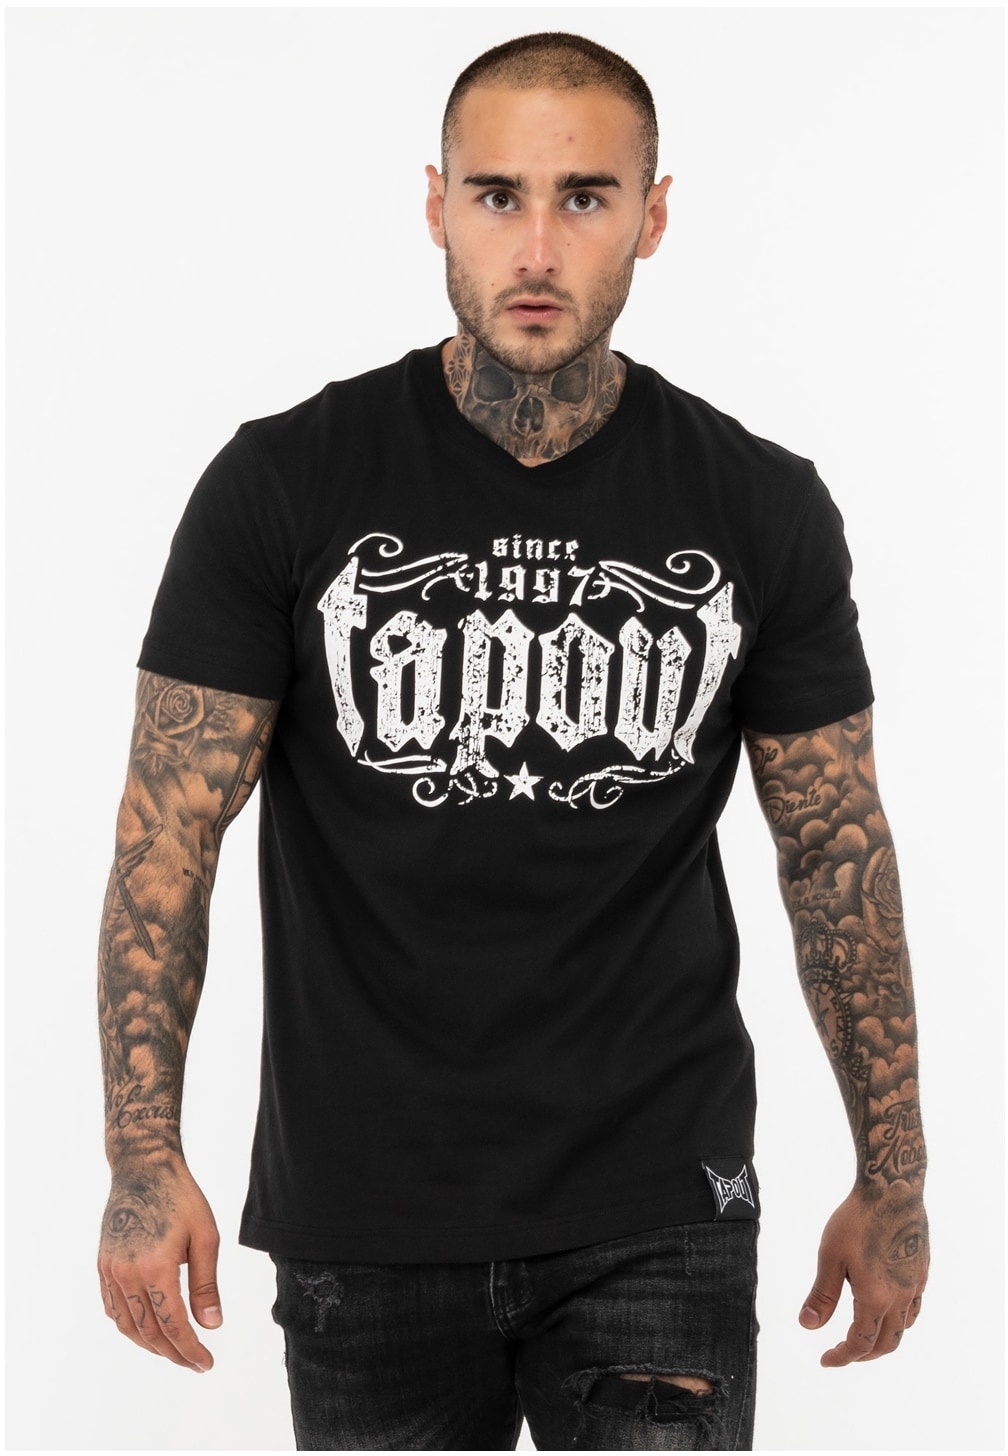 Tapout Herren T-Shirt normale Passform CRASHED